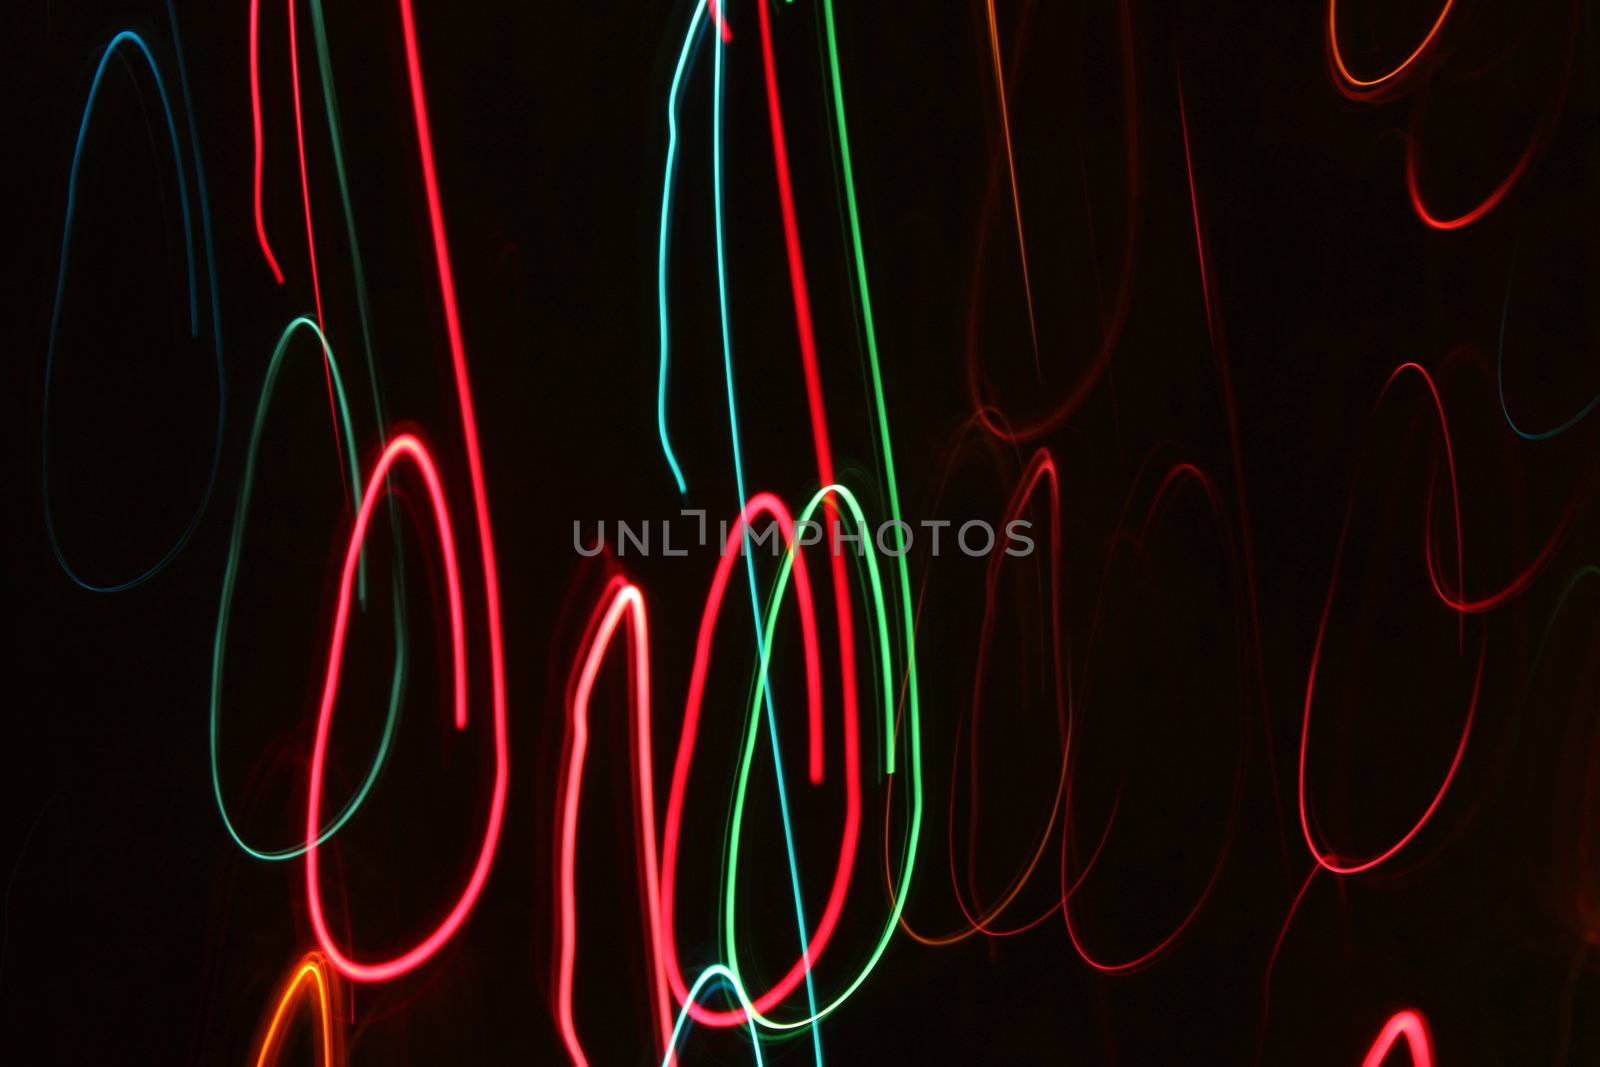 Abstract Christmas light blurred by motion